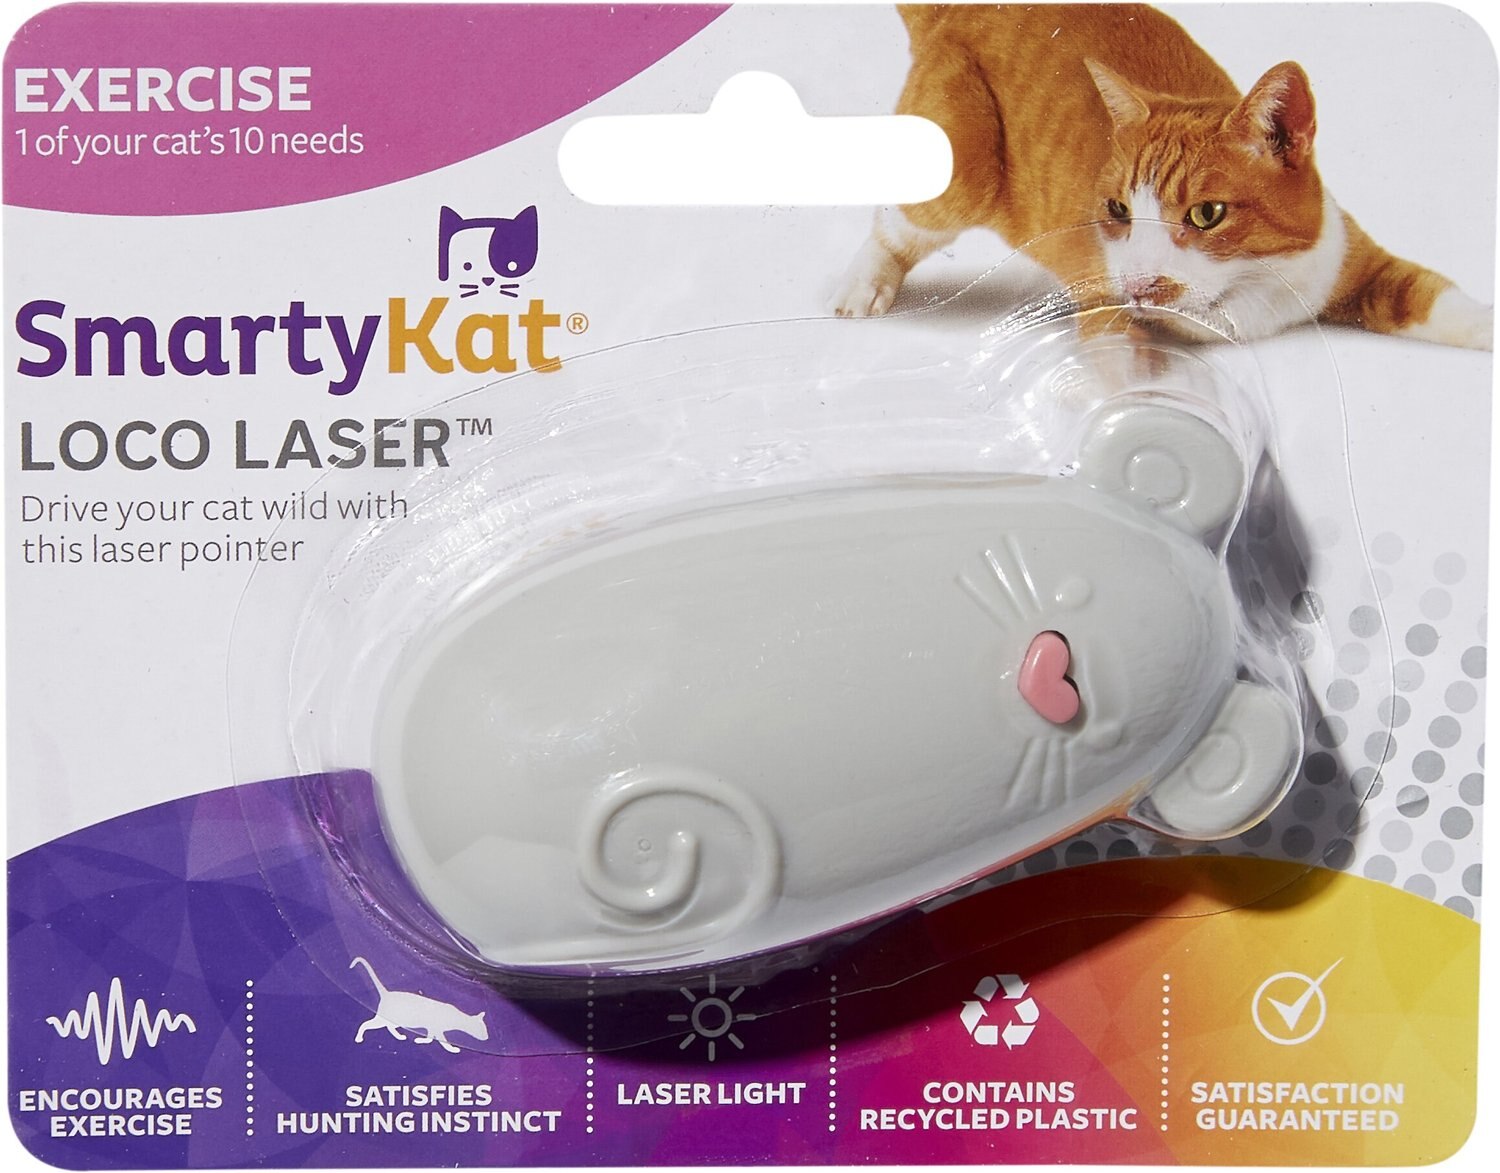 pounce interactive cat toy